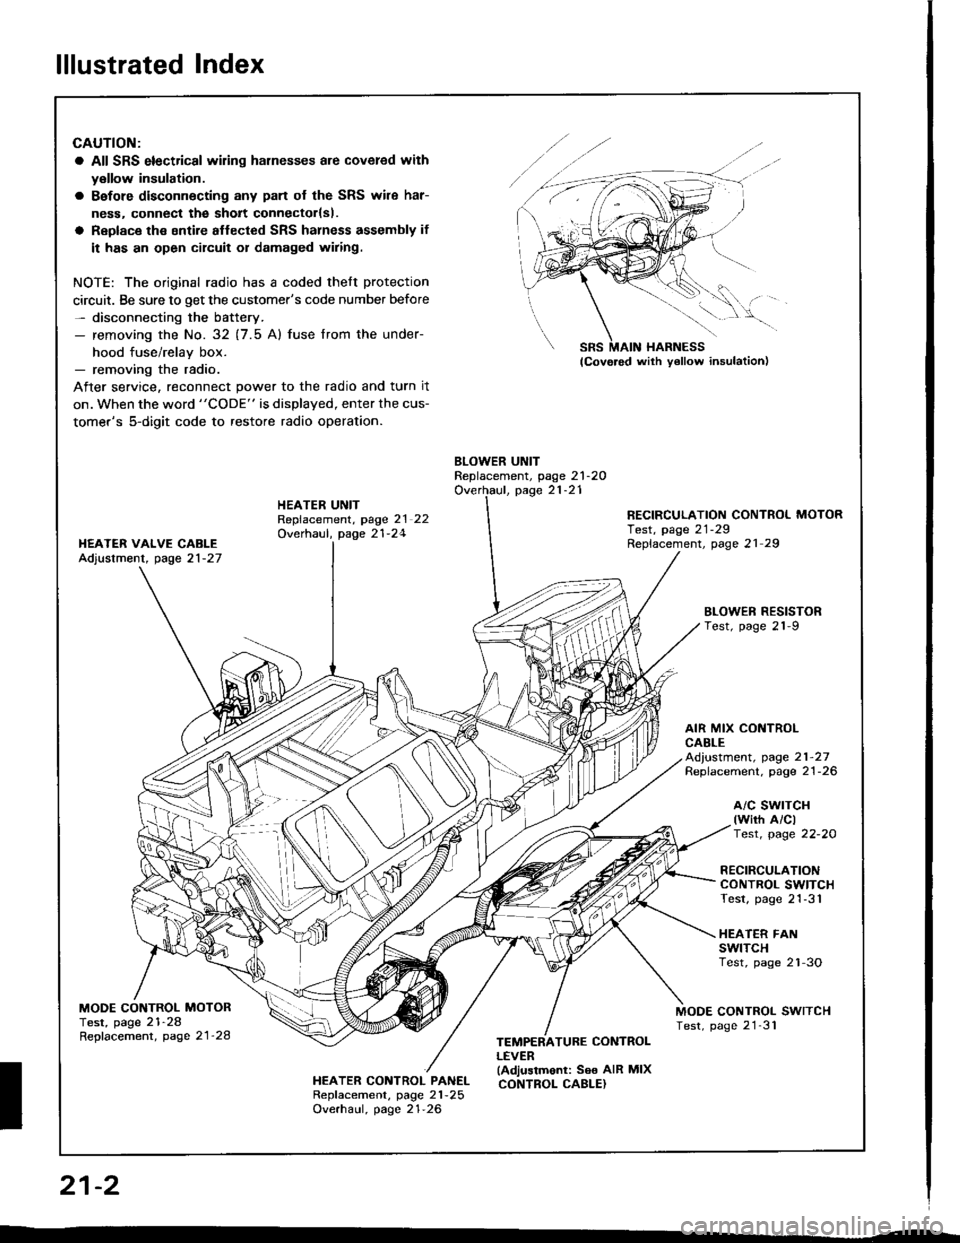 HONDA INTEGRA 1994 4.G Owners Manual lllustrated Index
CAUTION:
a All SRS electrical wiling harnesses are covered with
y€llow insulation.
a Bafore disconnecting any pan of the SRS wile har-
ness. connect the sholt connectorlsl.
a Repla